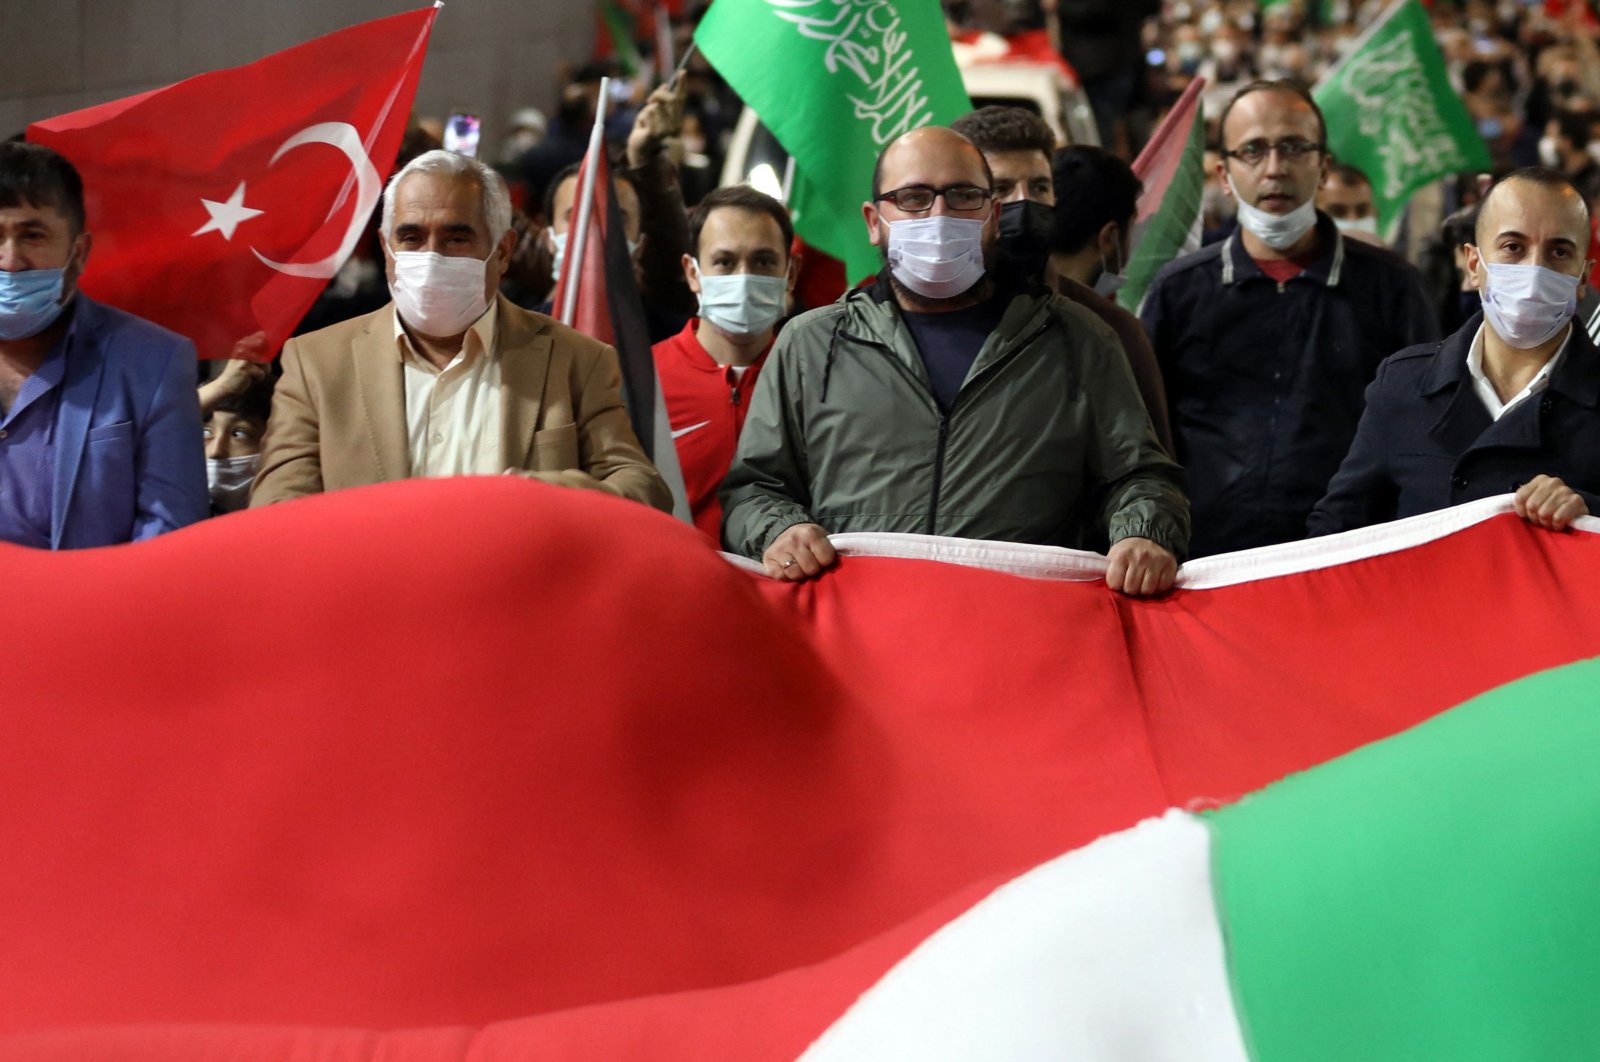 People demonstrate outside the Israel Consulate in Istanbul, late on May 10, 2021, against Israel's deadly air strikes launched on the Gaza Strip, Palestine, killing at least 20 people. (AFP Photo)